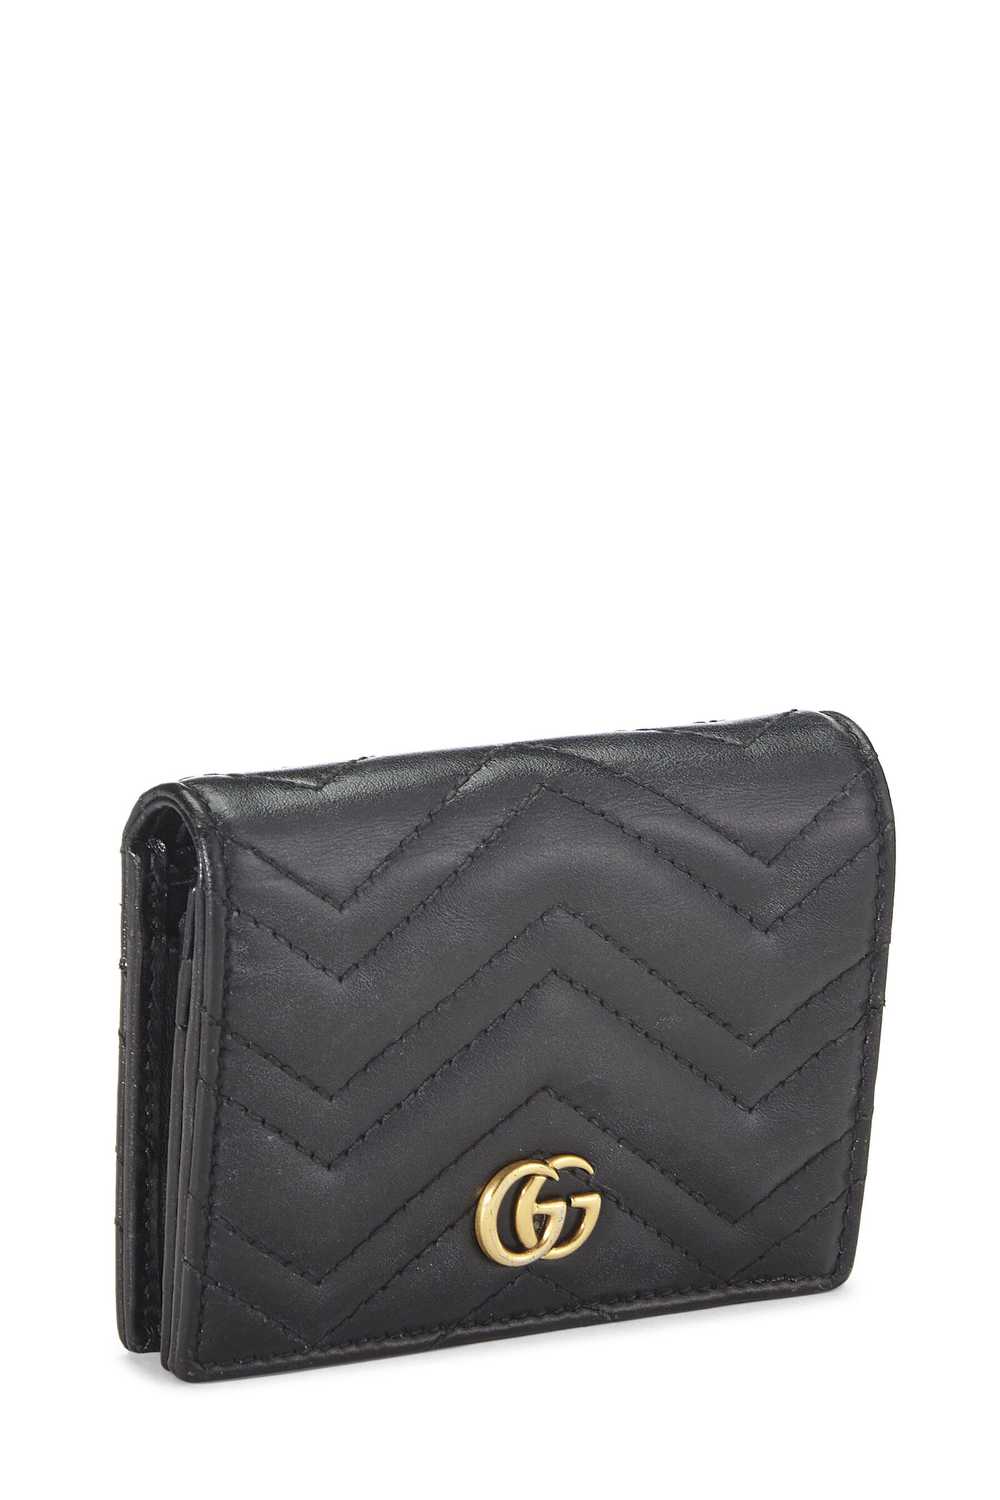 Black Leather GG Marmont Card Case - image 2